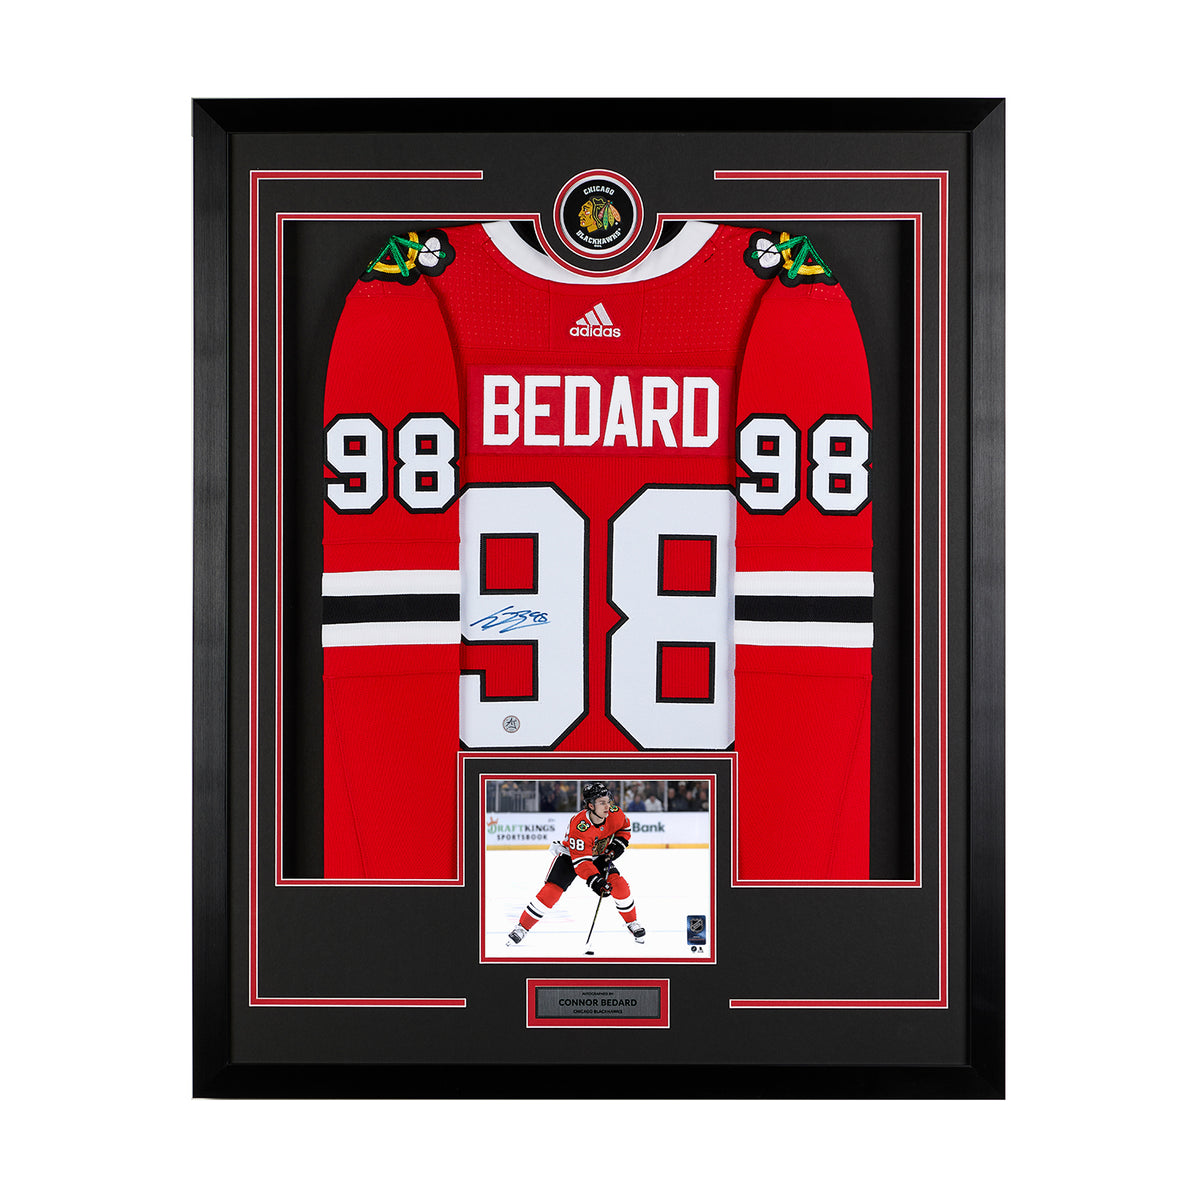 Connor Bedard signs with lululemon - The Chicago Blackhawks